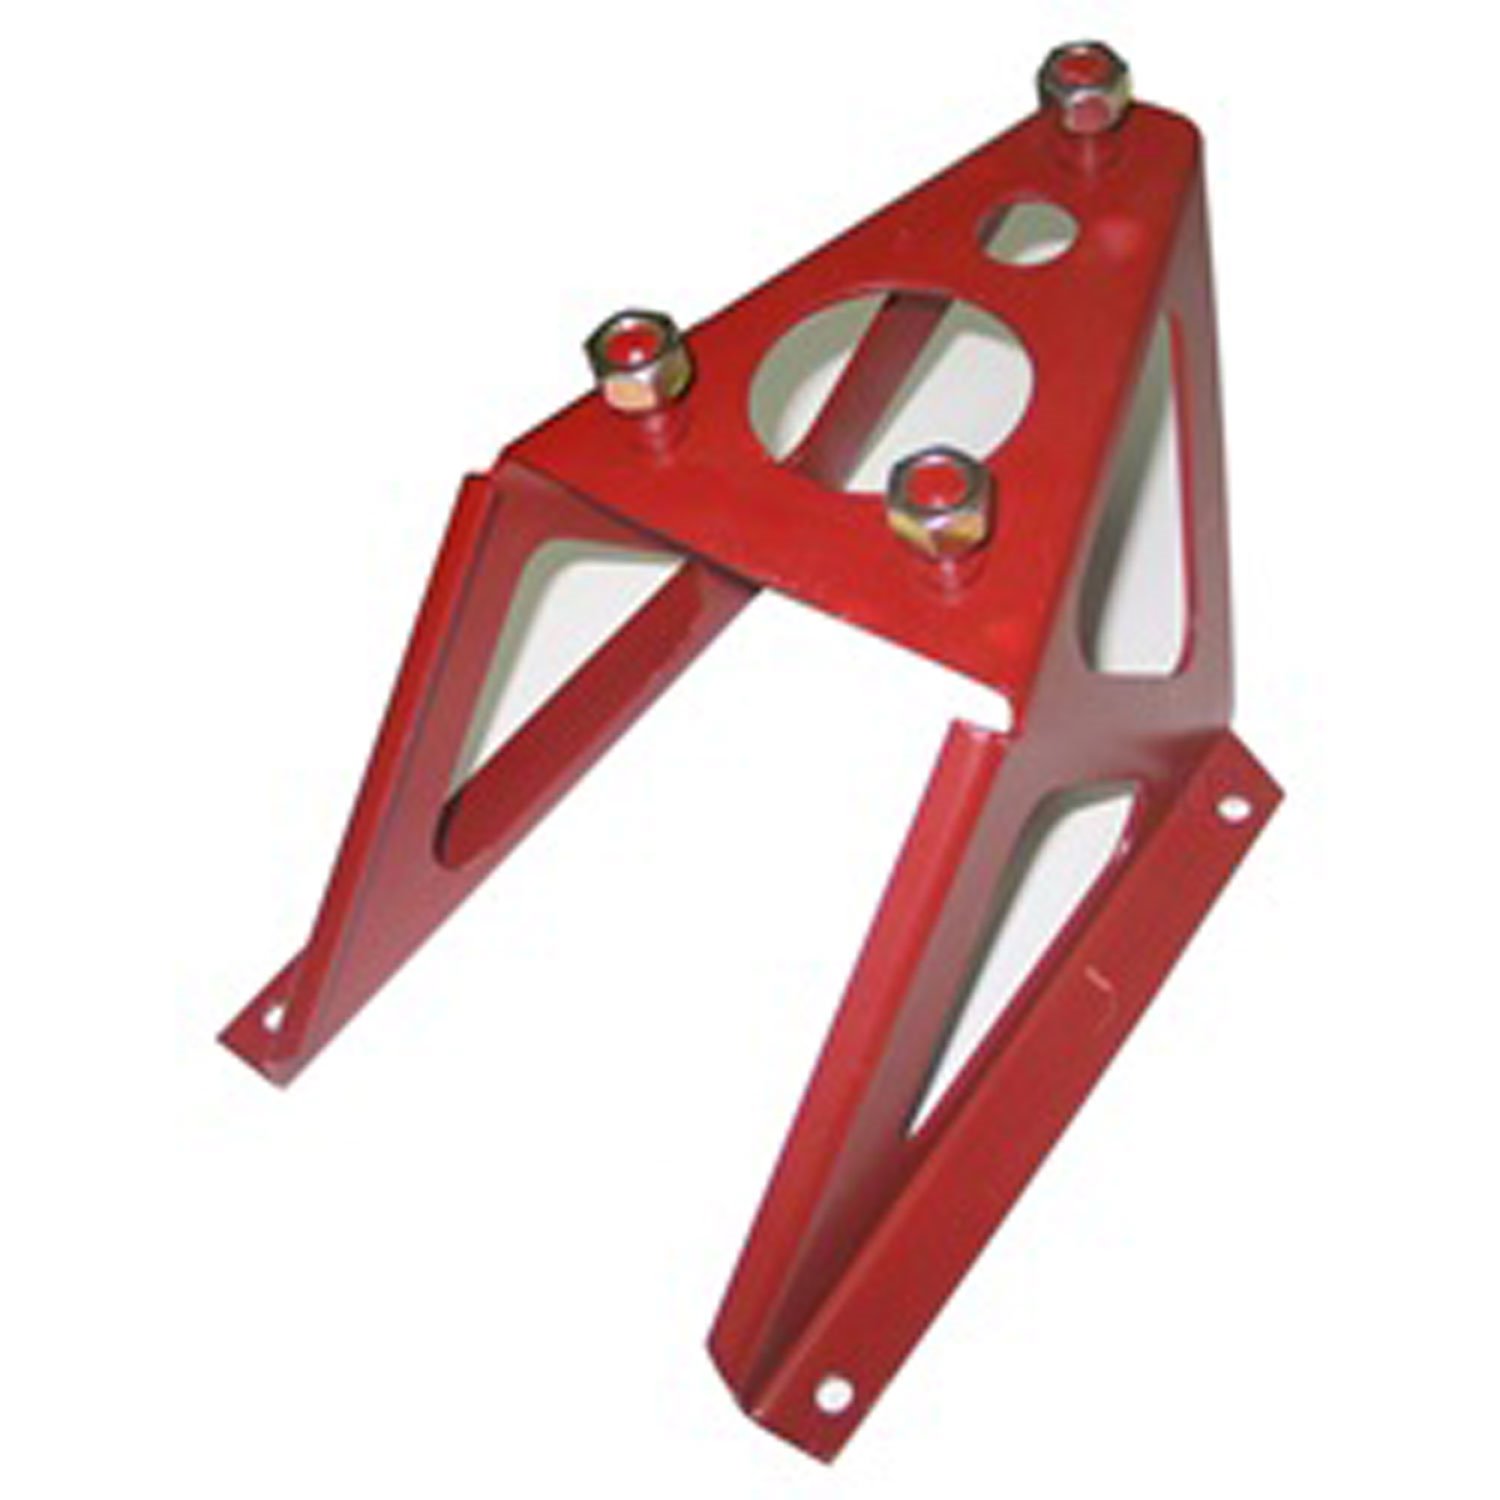 This late 3-bolt style tire carrier from Omix-ADA fits 44-45 Willys MB and Ford GPW.